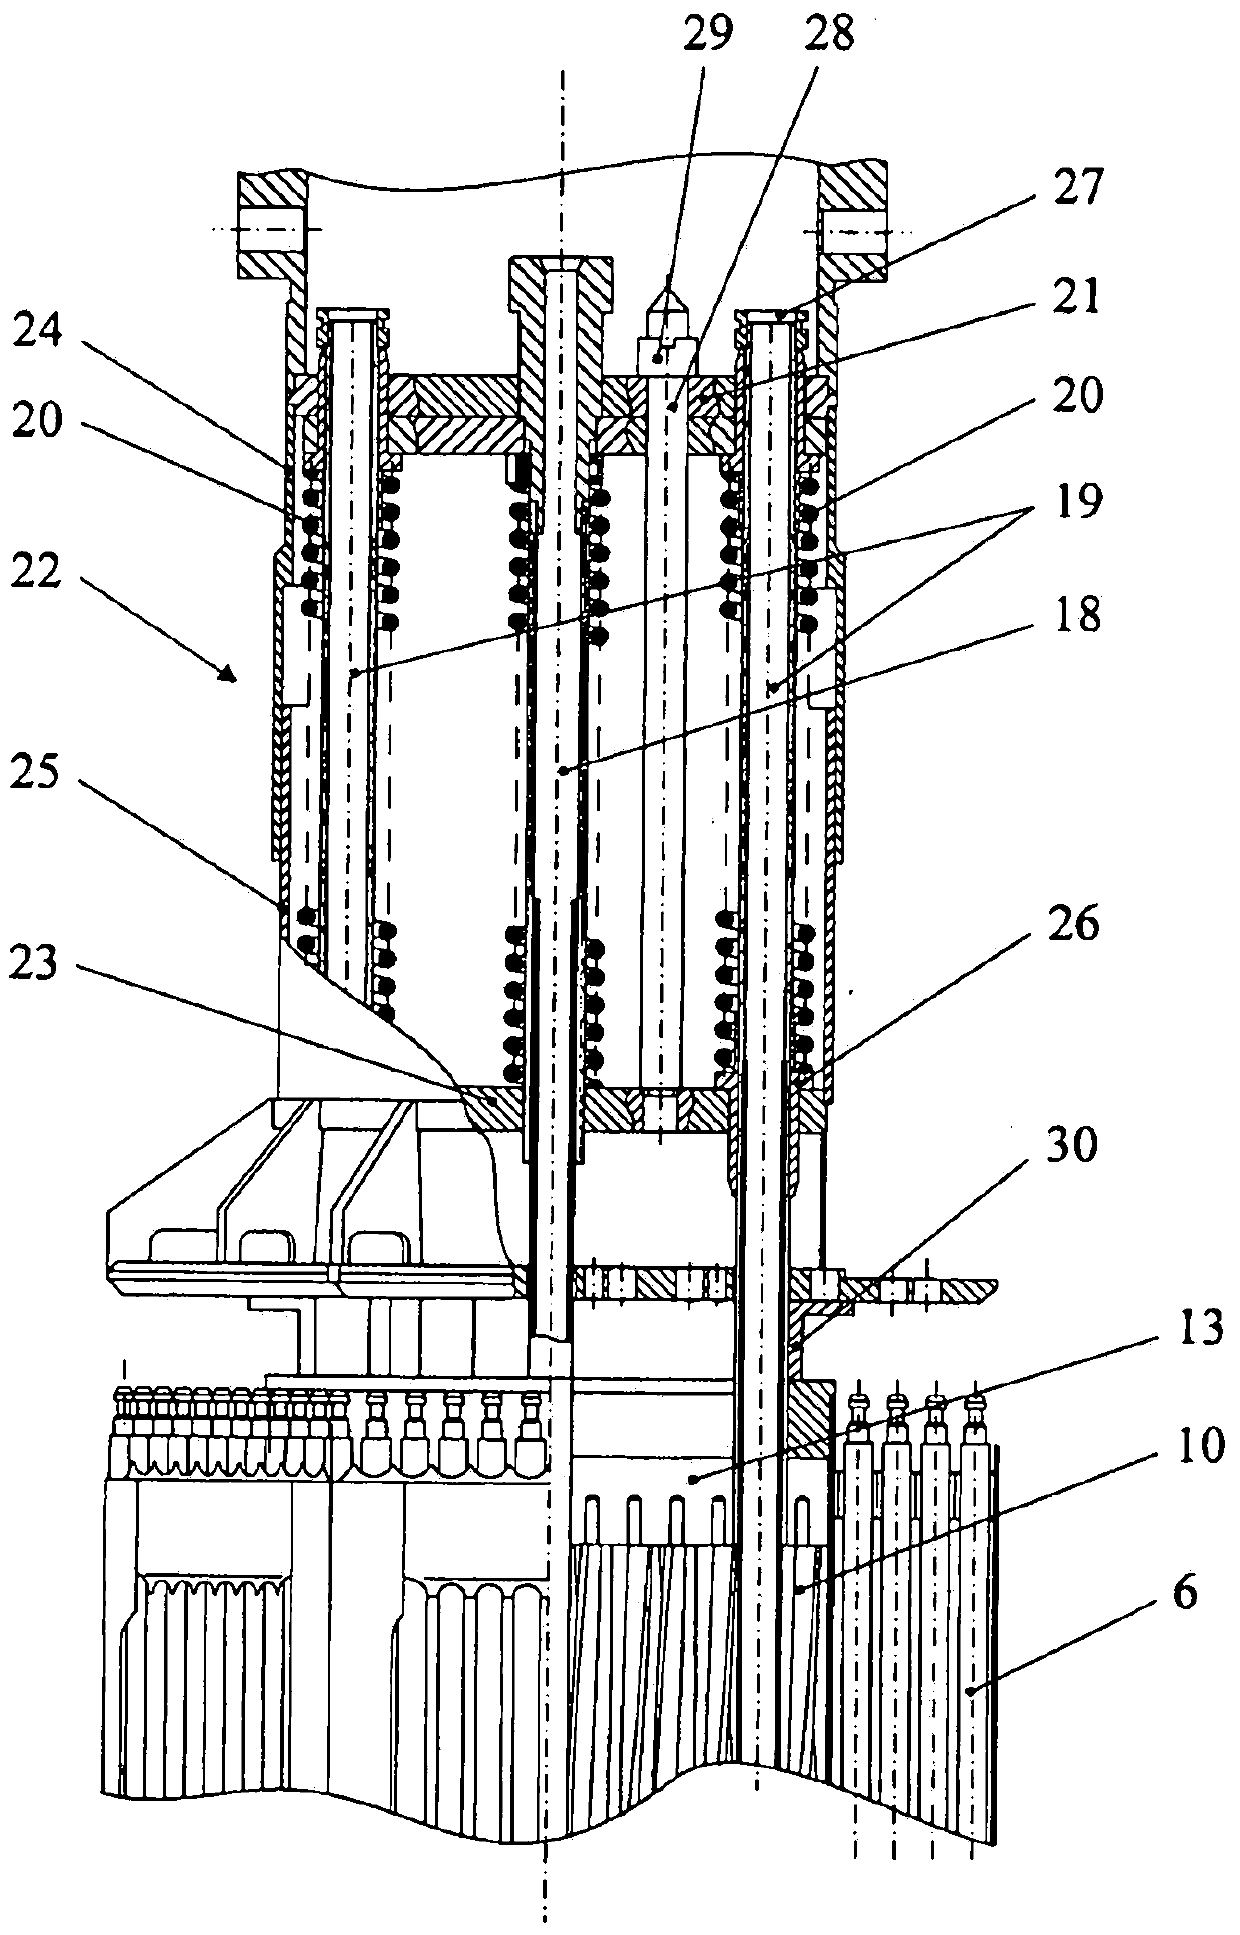 Nuclear reactor (optional), fuel assembly for seed-blanket subassembly of nuclear reactor (optional) as well as fuel element for fuel assembly